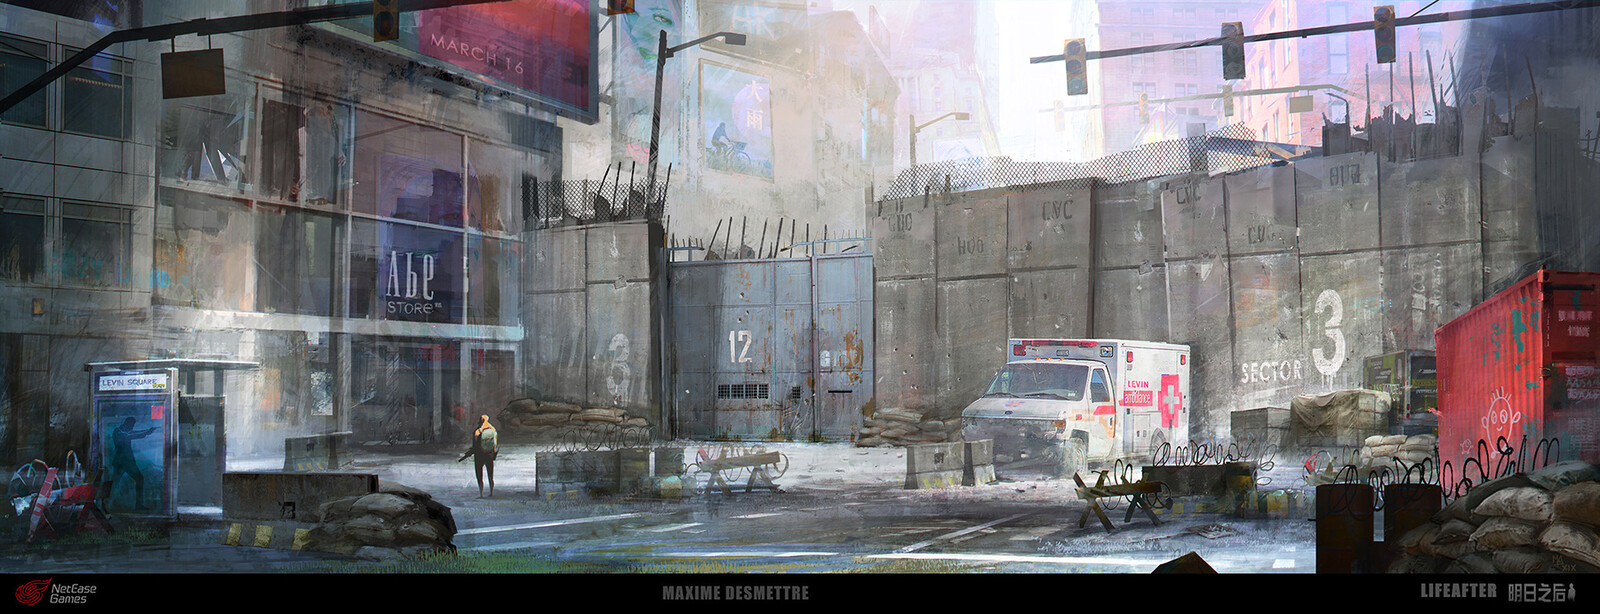 Life After - Security Gate
Concept Art (2019)

